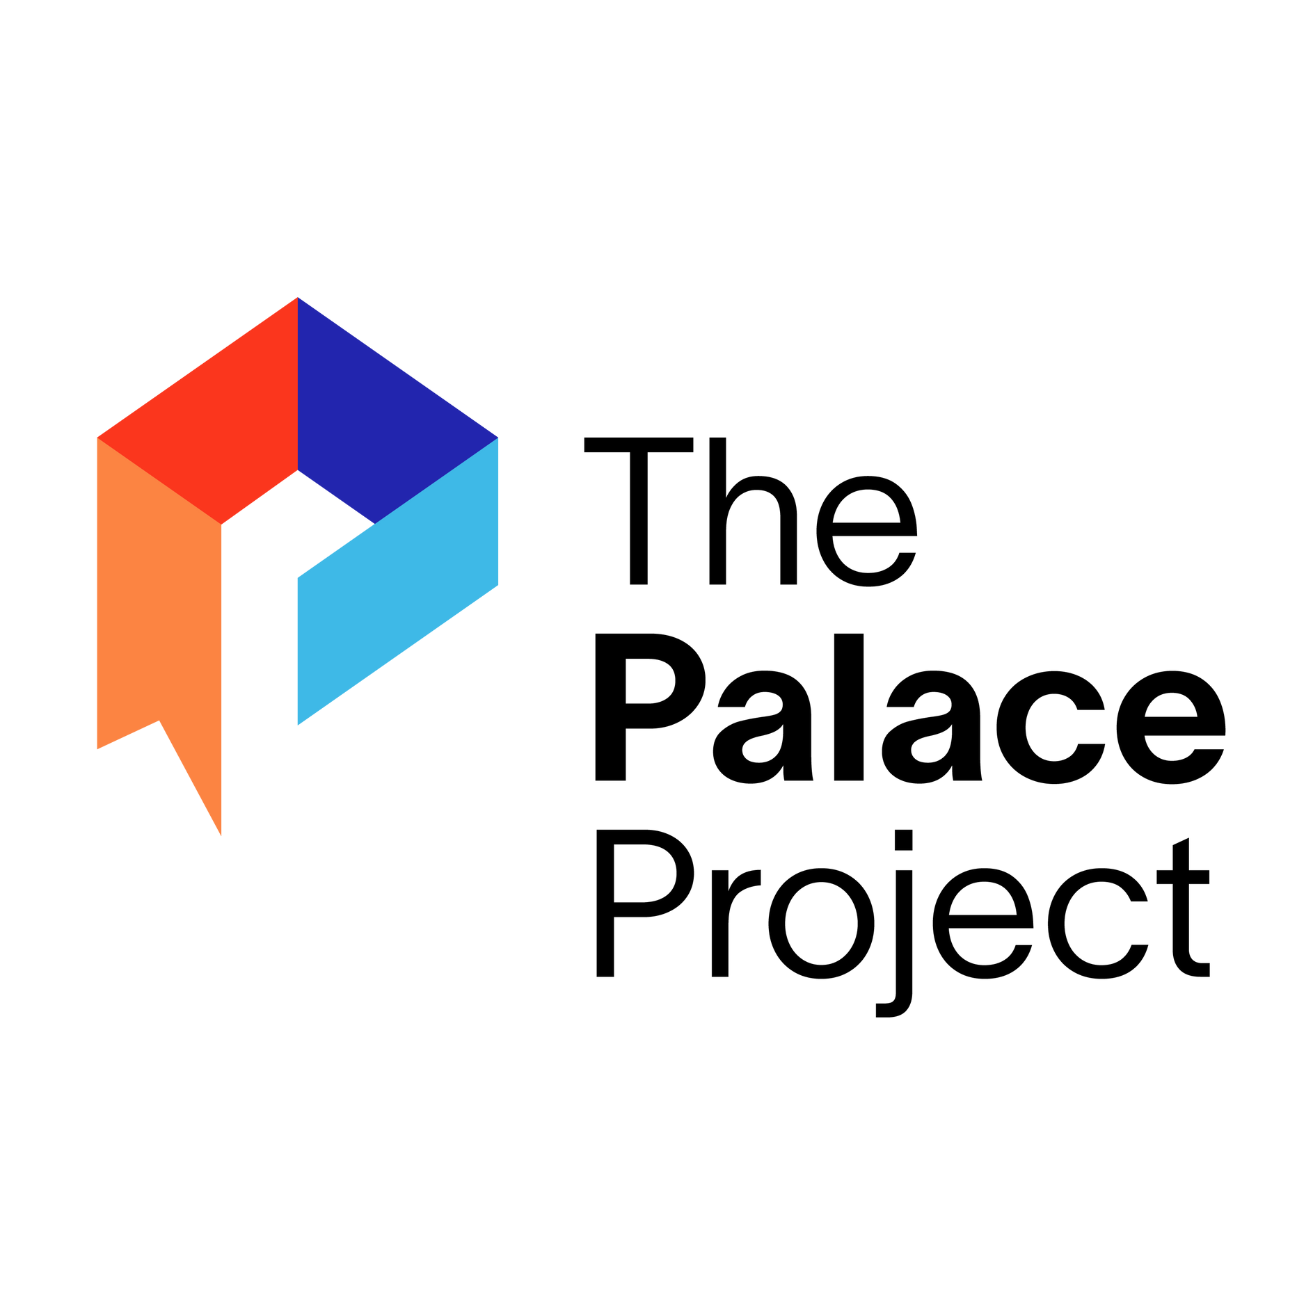 The Palace Project